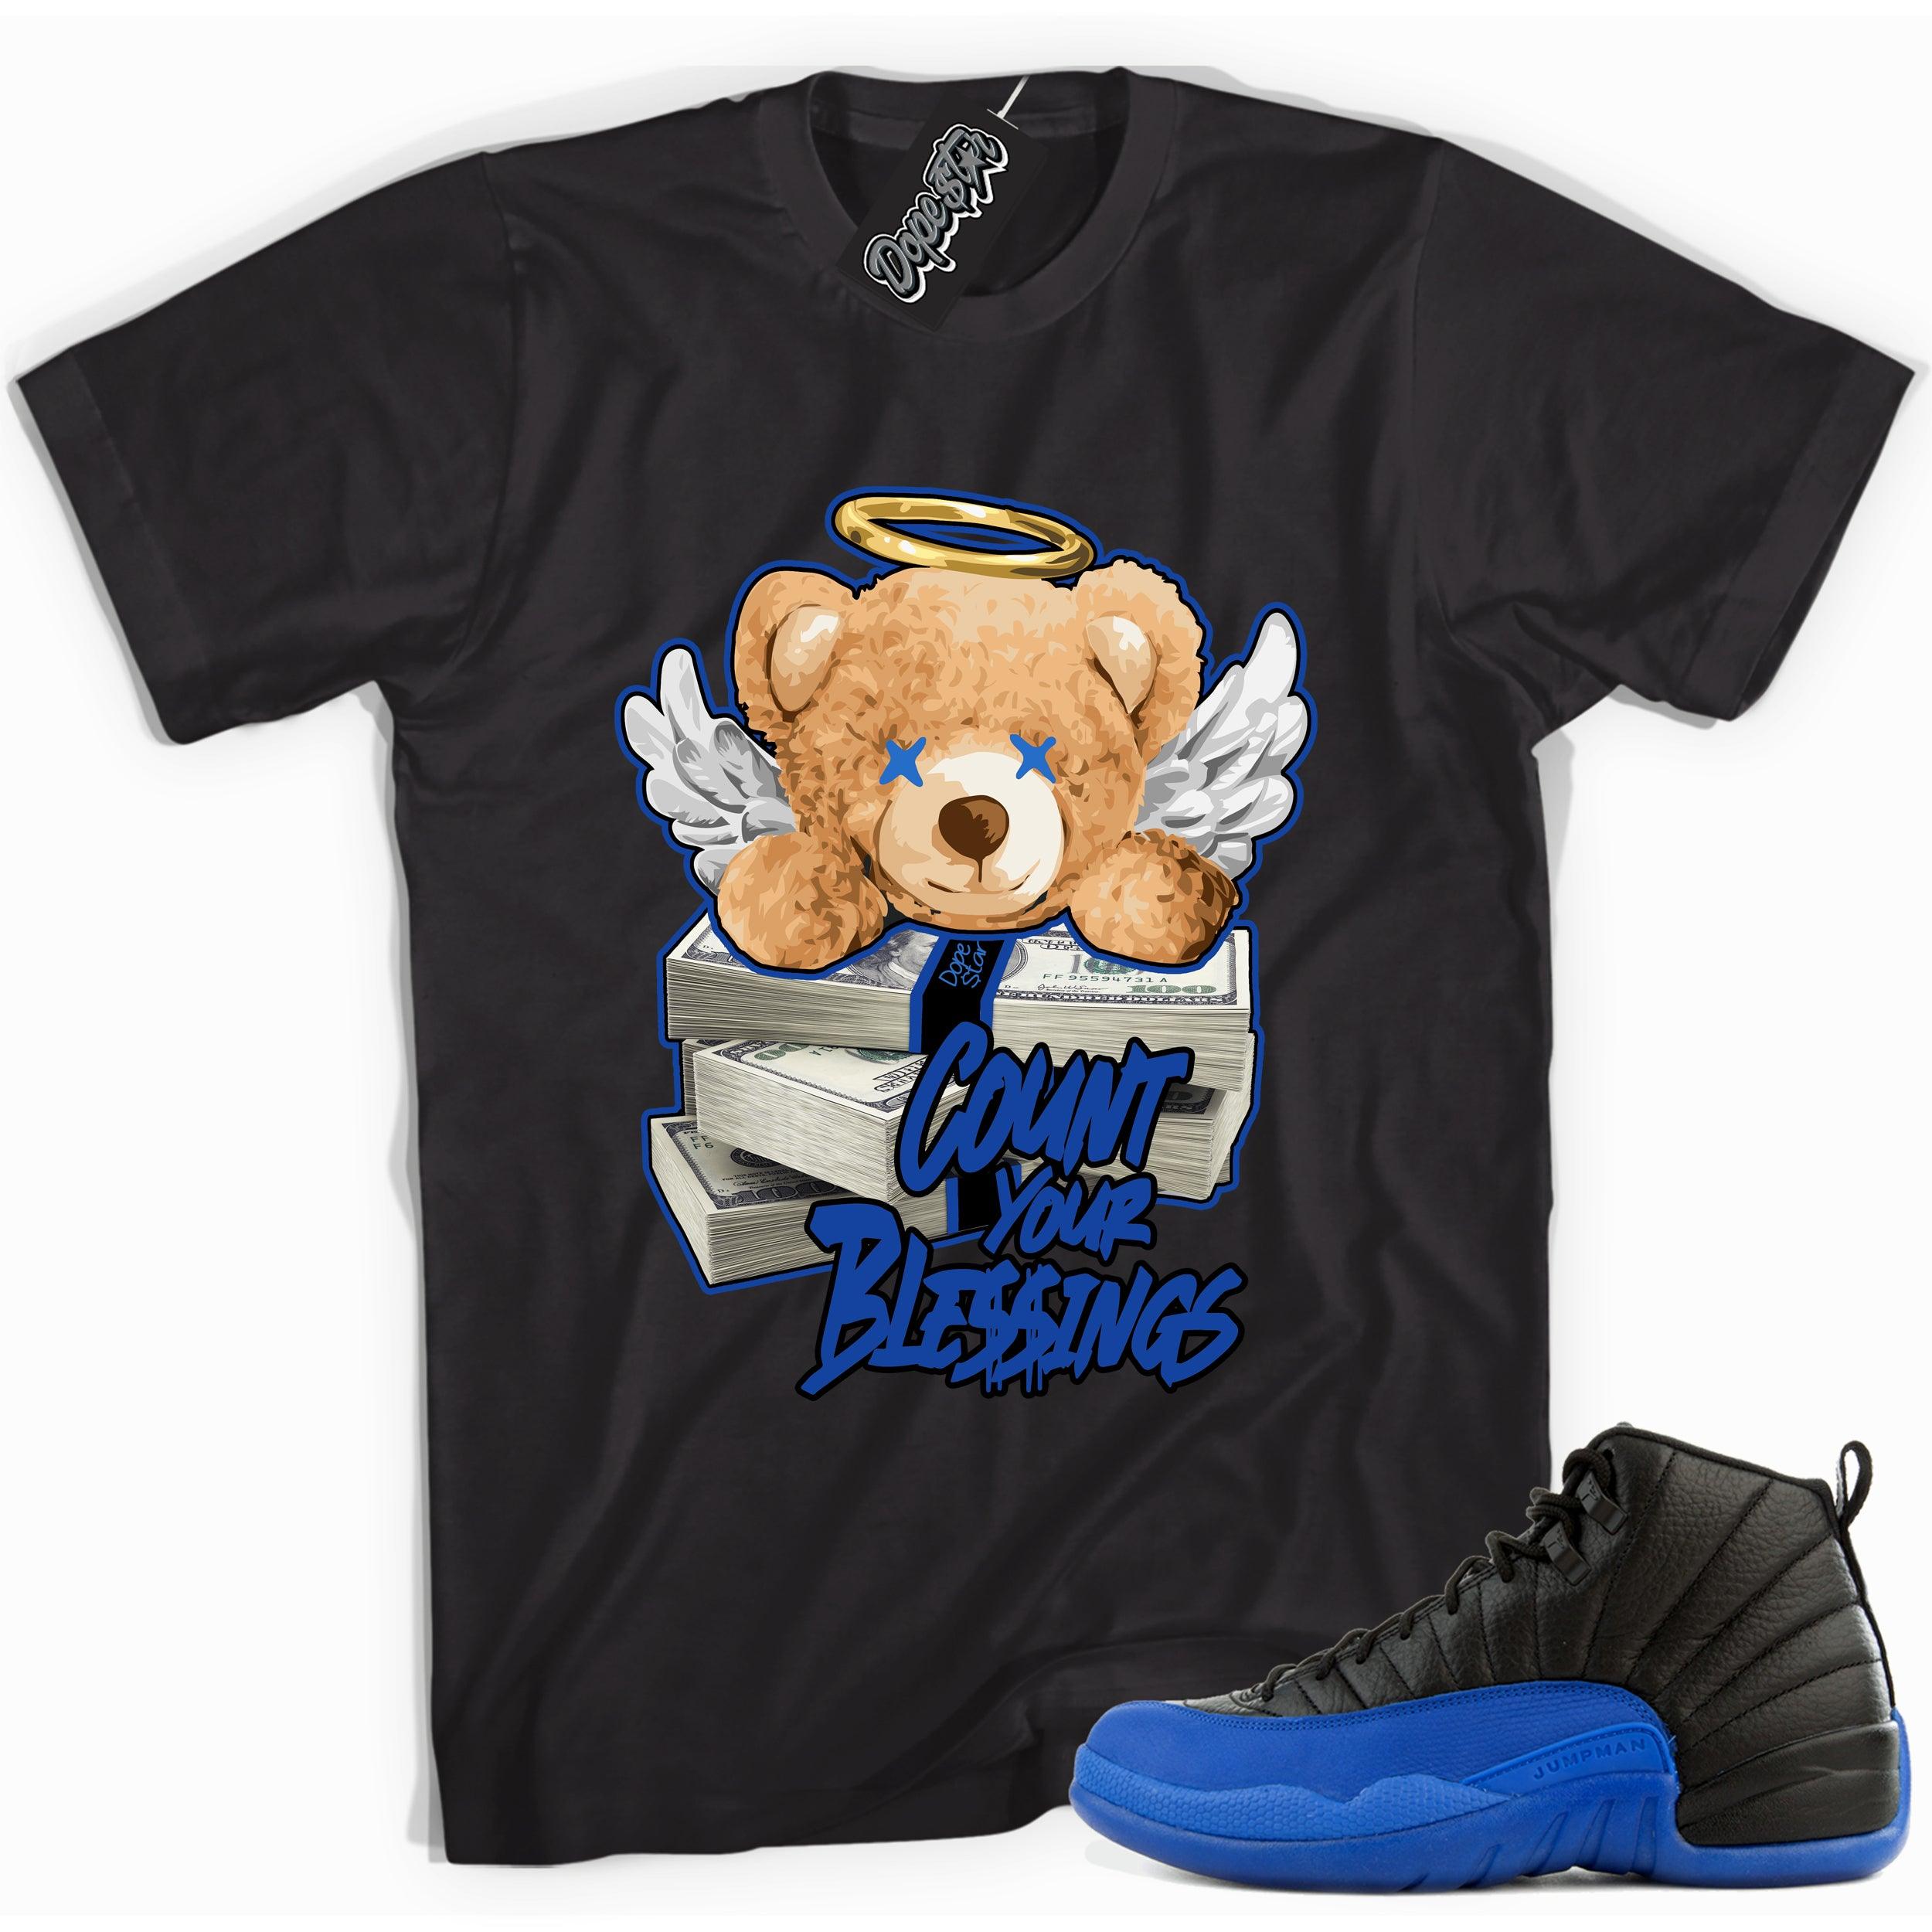 Cool black graphic tee with 'count your blessings' print, that perfectly matches  Air Jordan 12 Retro Black Game Royal sneakers.